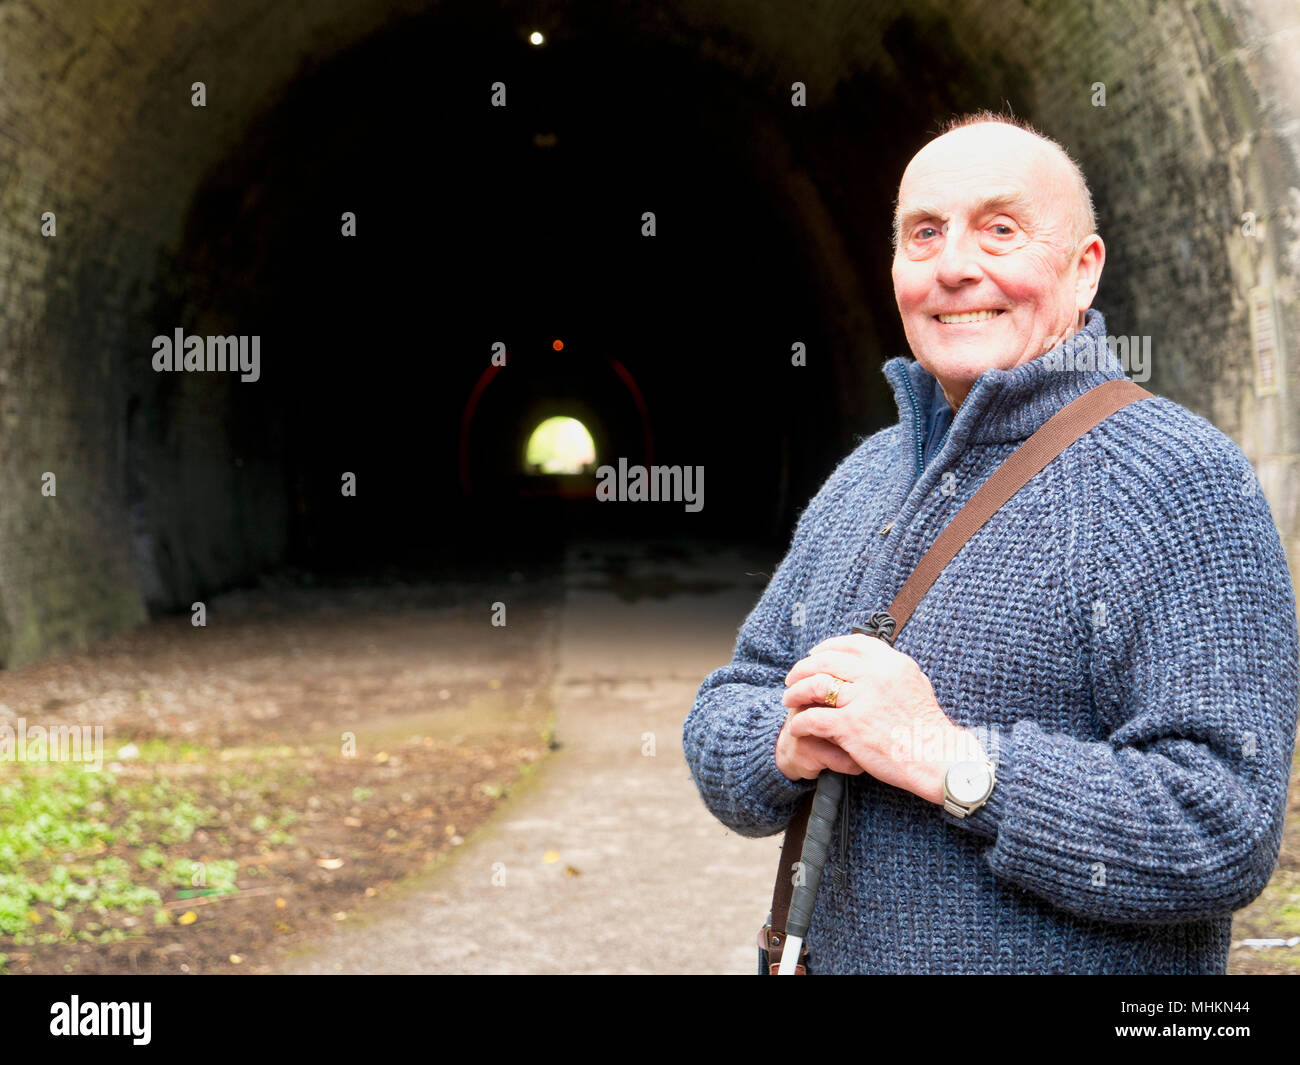 Ashbourne, UK. 2nd May, 2018. Blind British Armed Forces veteran Simon Mahoney at the entrance to Tissington Tunnel, Ashbourne, ahead of his book launch 'Descent into Darkness' which he wrote as an insight to the thousands who have & are losing their sight, their carers and professionals working in the eye care field. Credit: Doug Blane/Alamy Live News Stock Photo